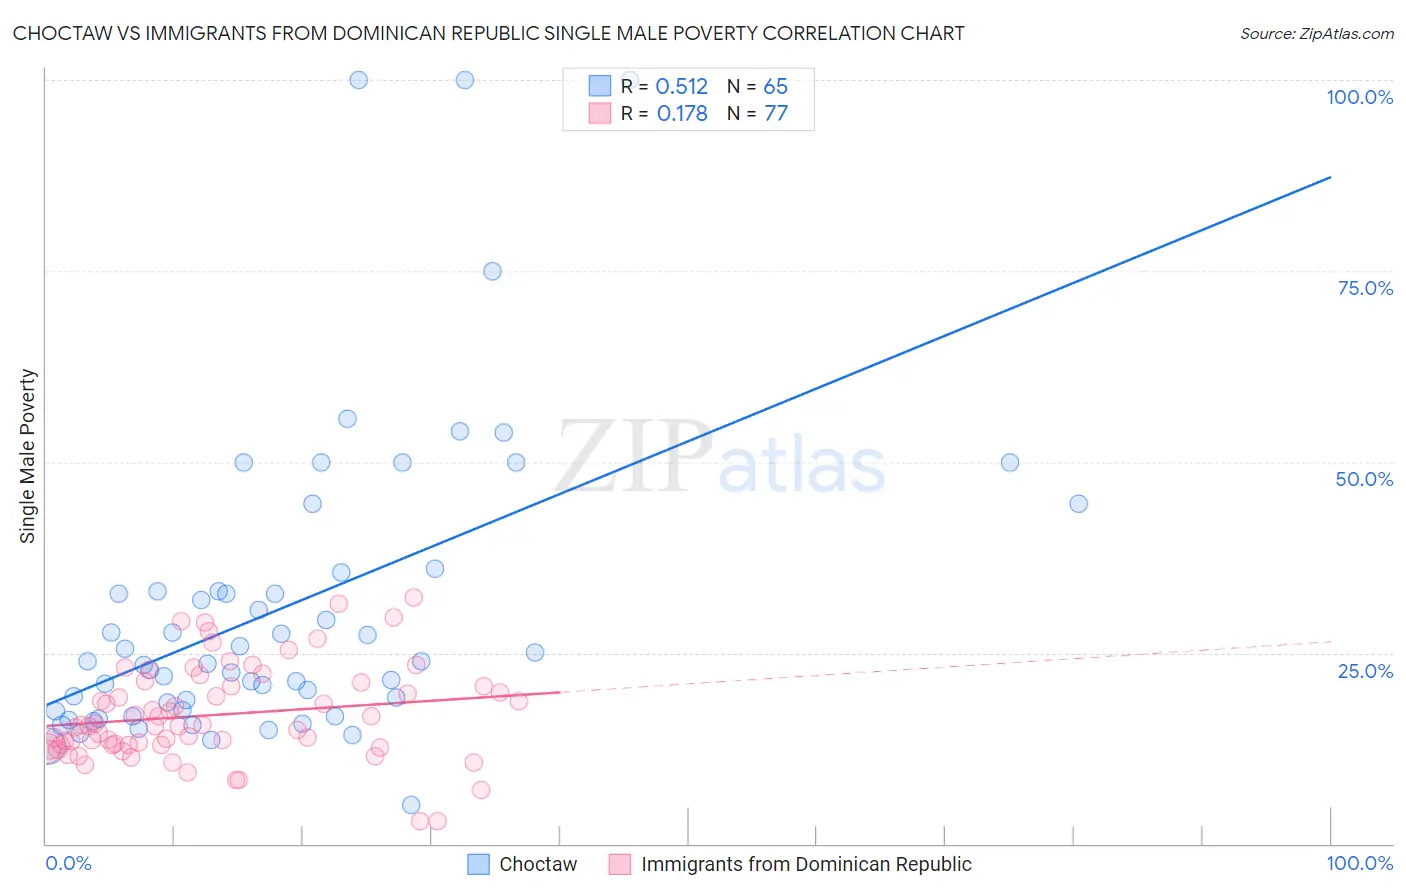 Choctaw vs Immigrants from Dominican Republic Single Male Poverty